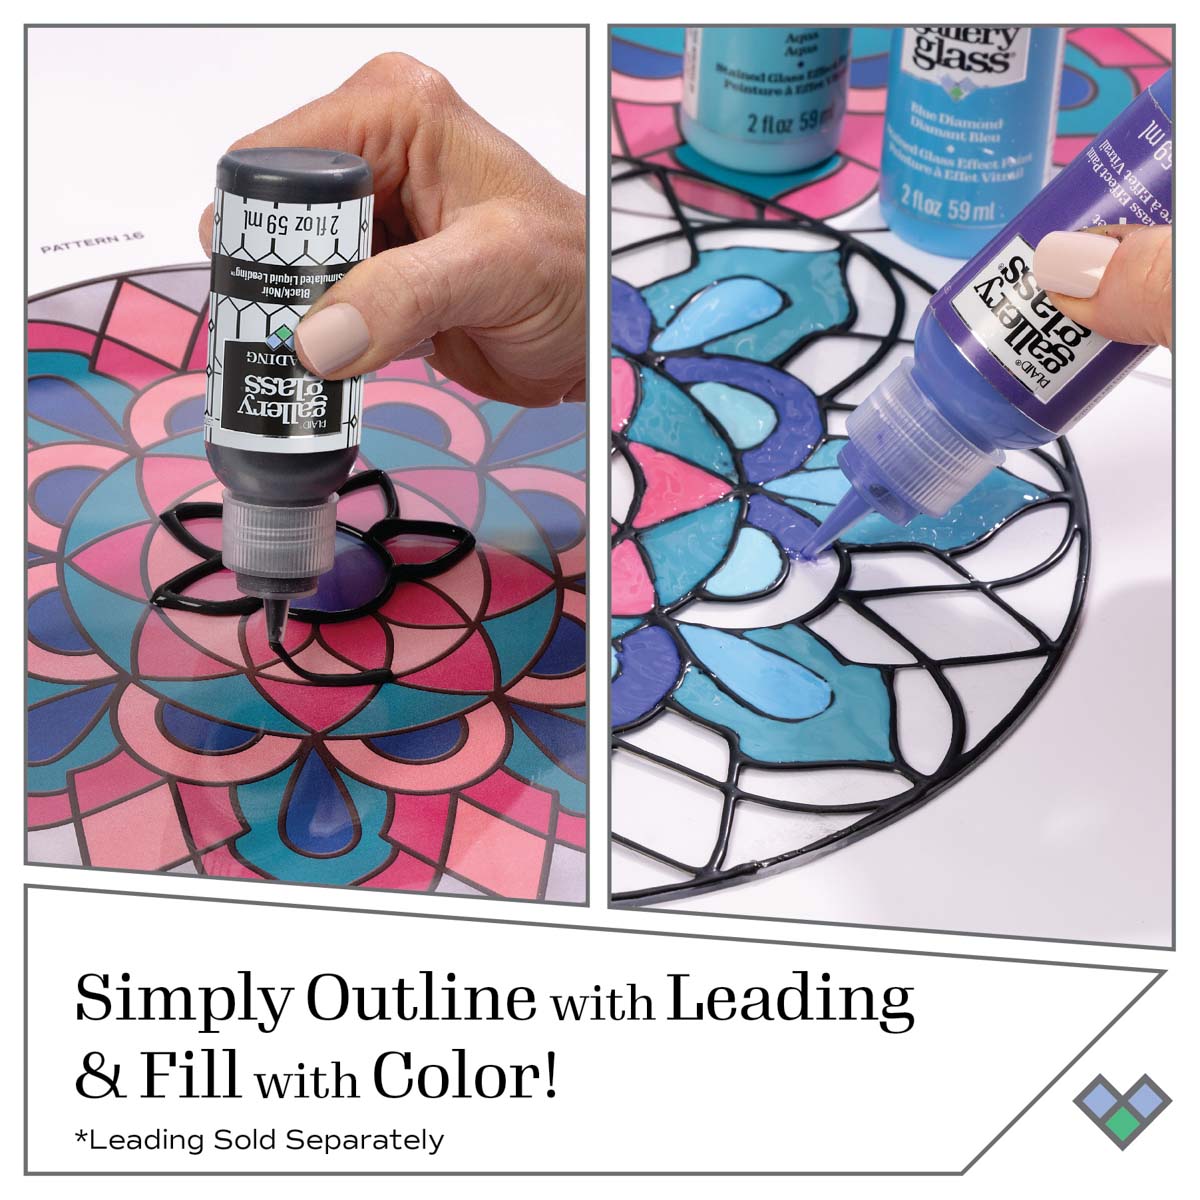 Gallery Glass ® Stained Glass Effect Paint - Glitter Silver, 2 oz. - 20045